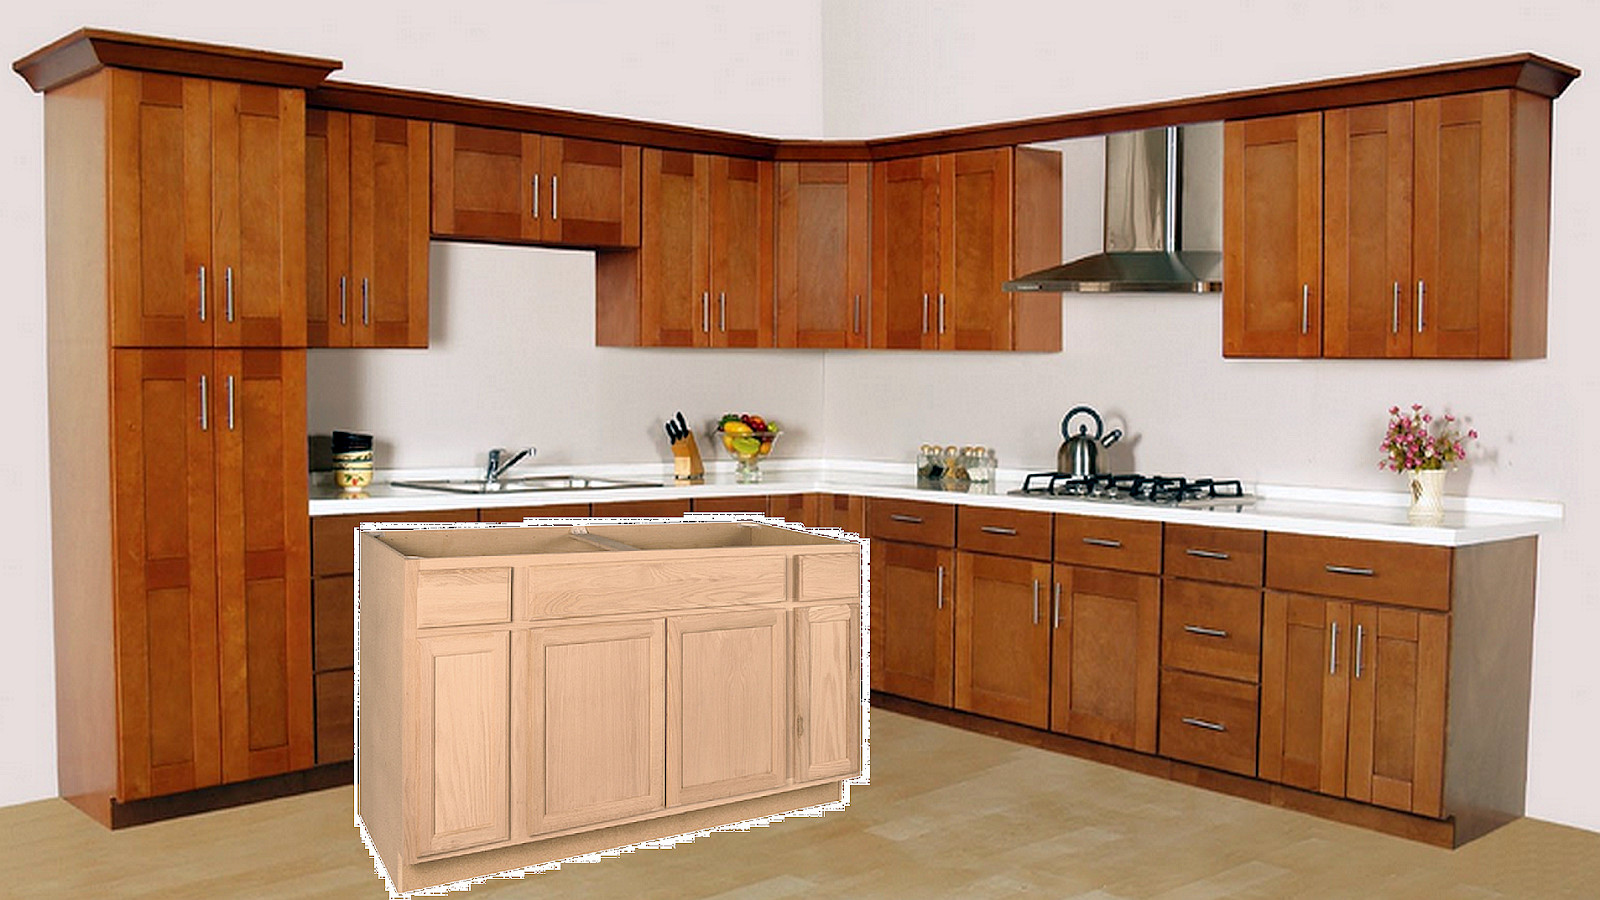 Unfinished Kitchen Cabinets
 how to finish unfinished kitchen cabinets